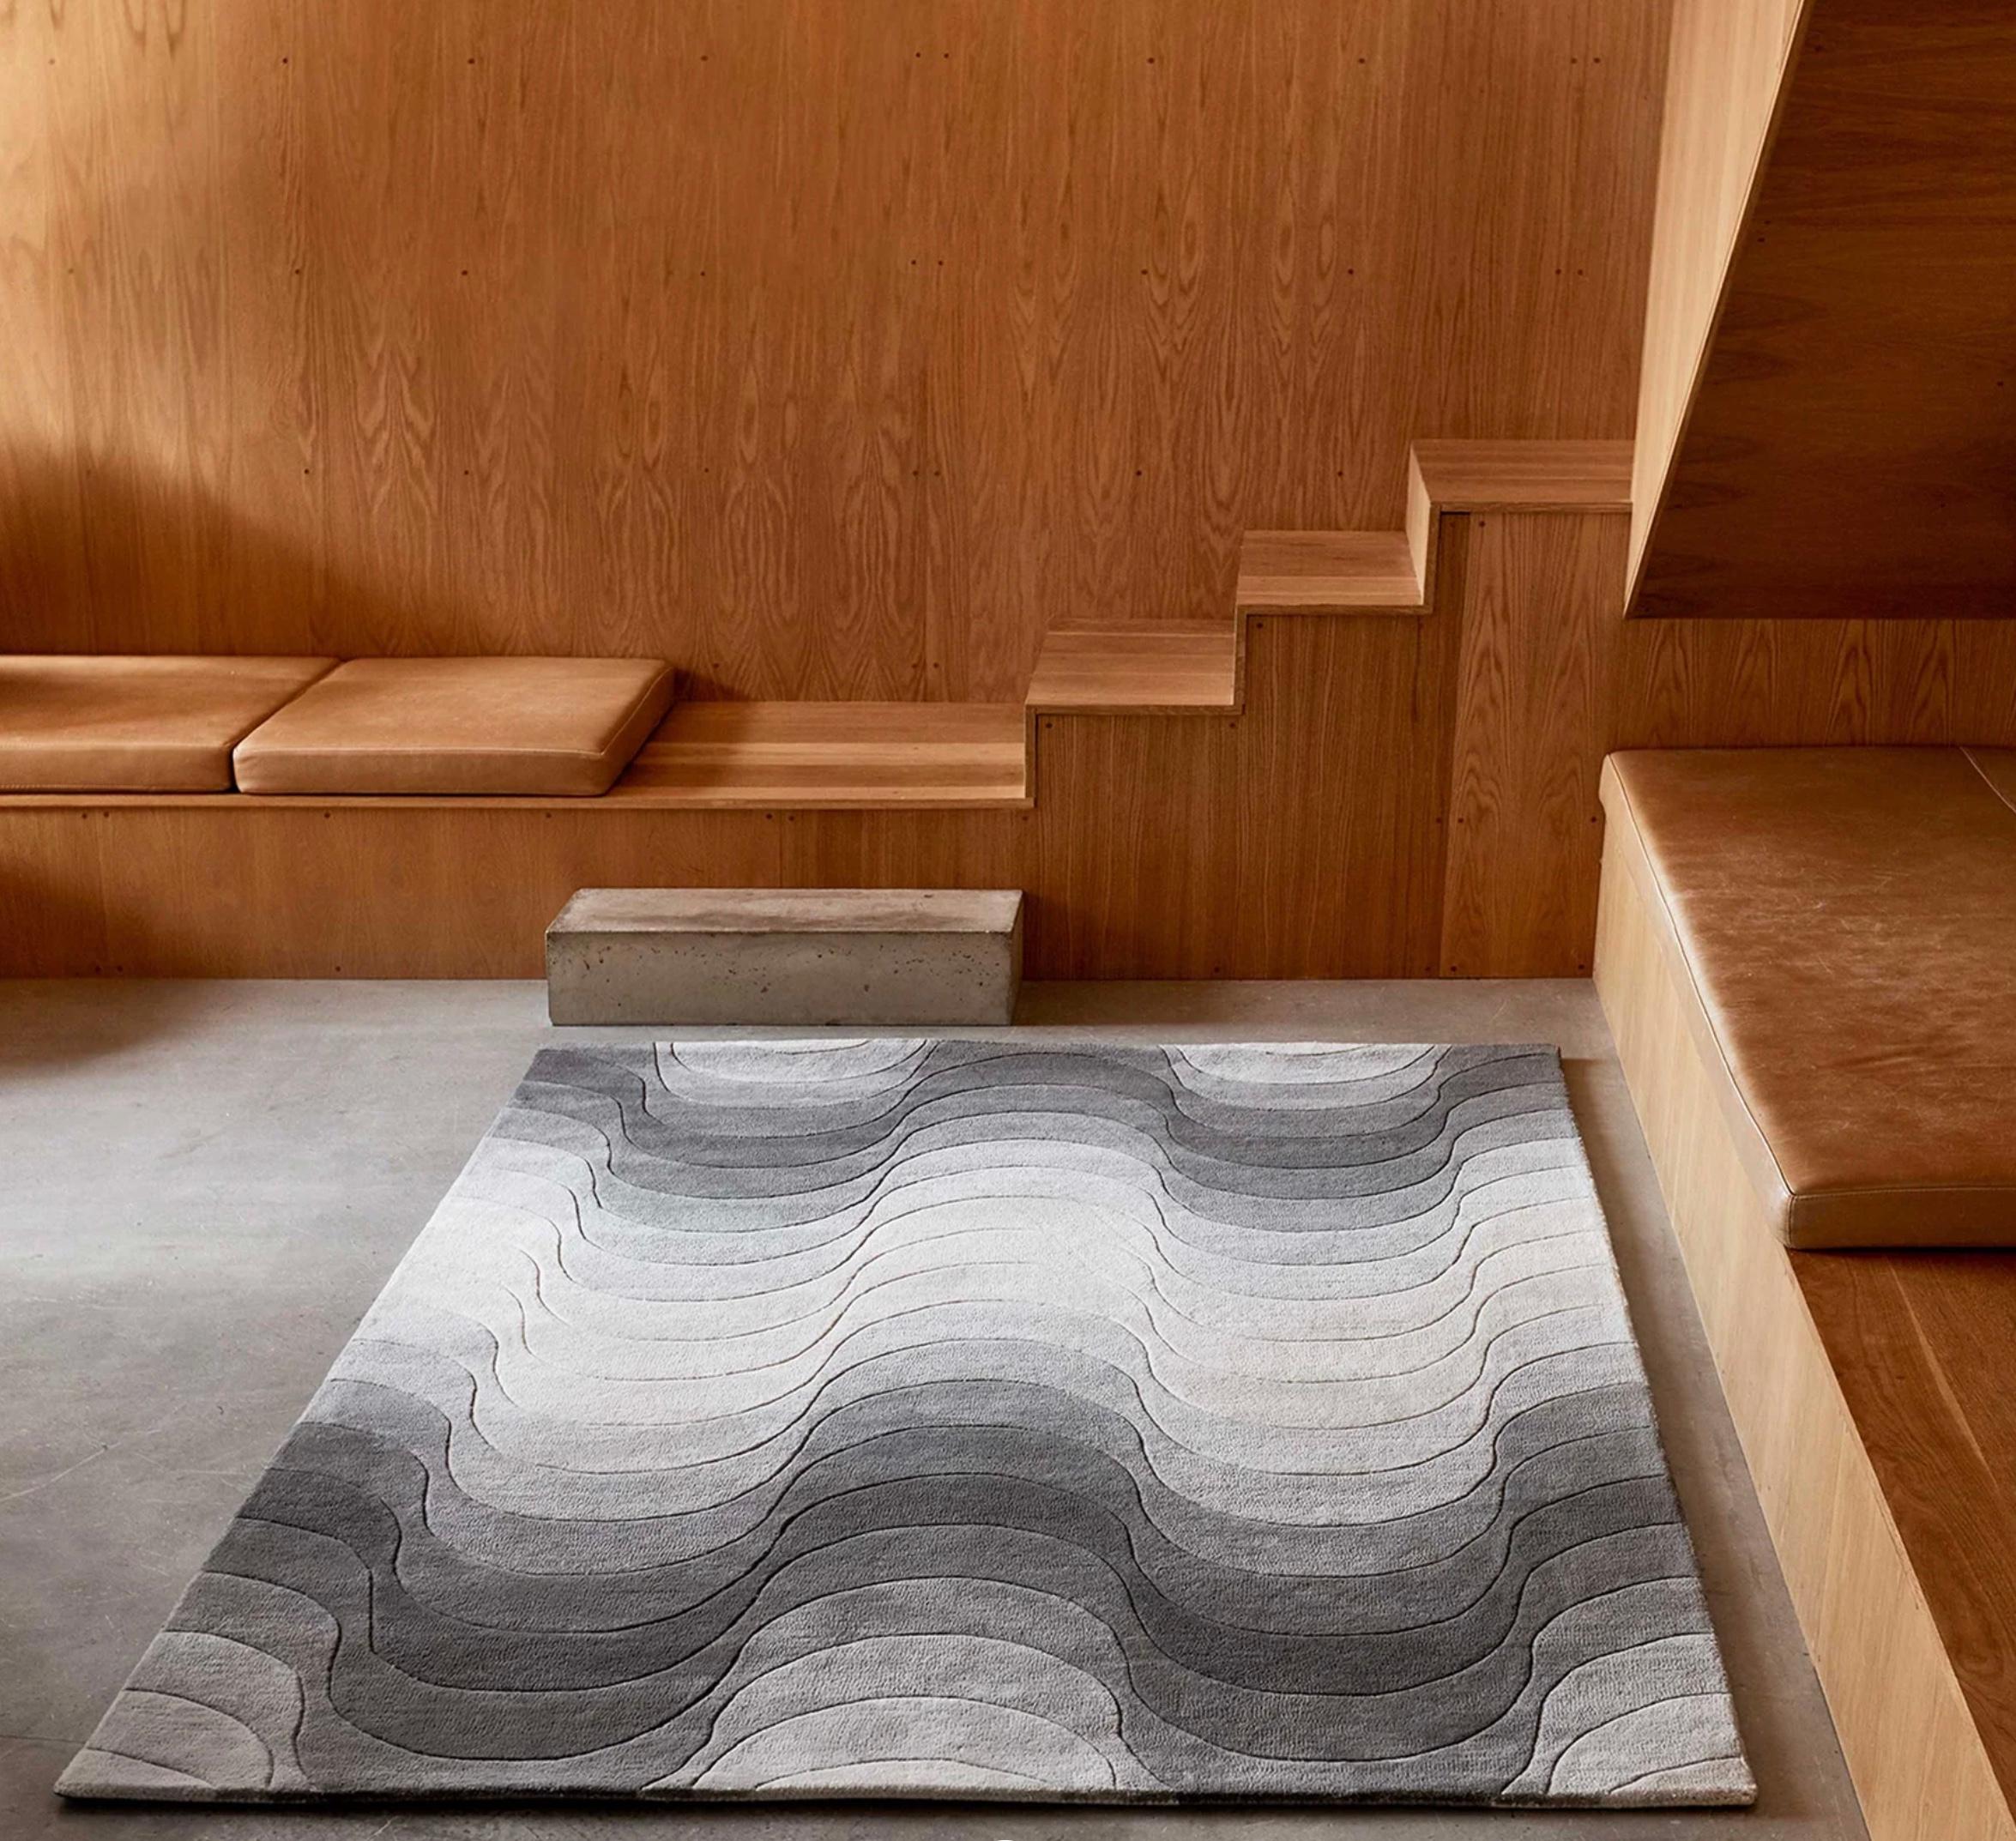 Verner Panton 'Wave' Rug 240 x 170cm for Verpan. Current production.

As well as adding a sculptural feature to a room, rugs also serve to emphasize and/or transform the dimensions of the space. All Verpan carpets are made from hand-woven 100% New